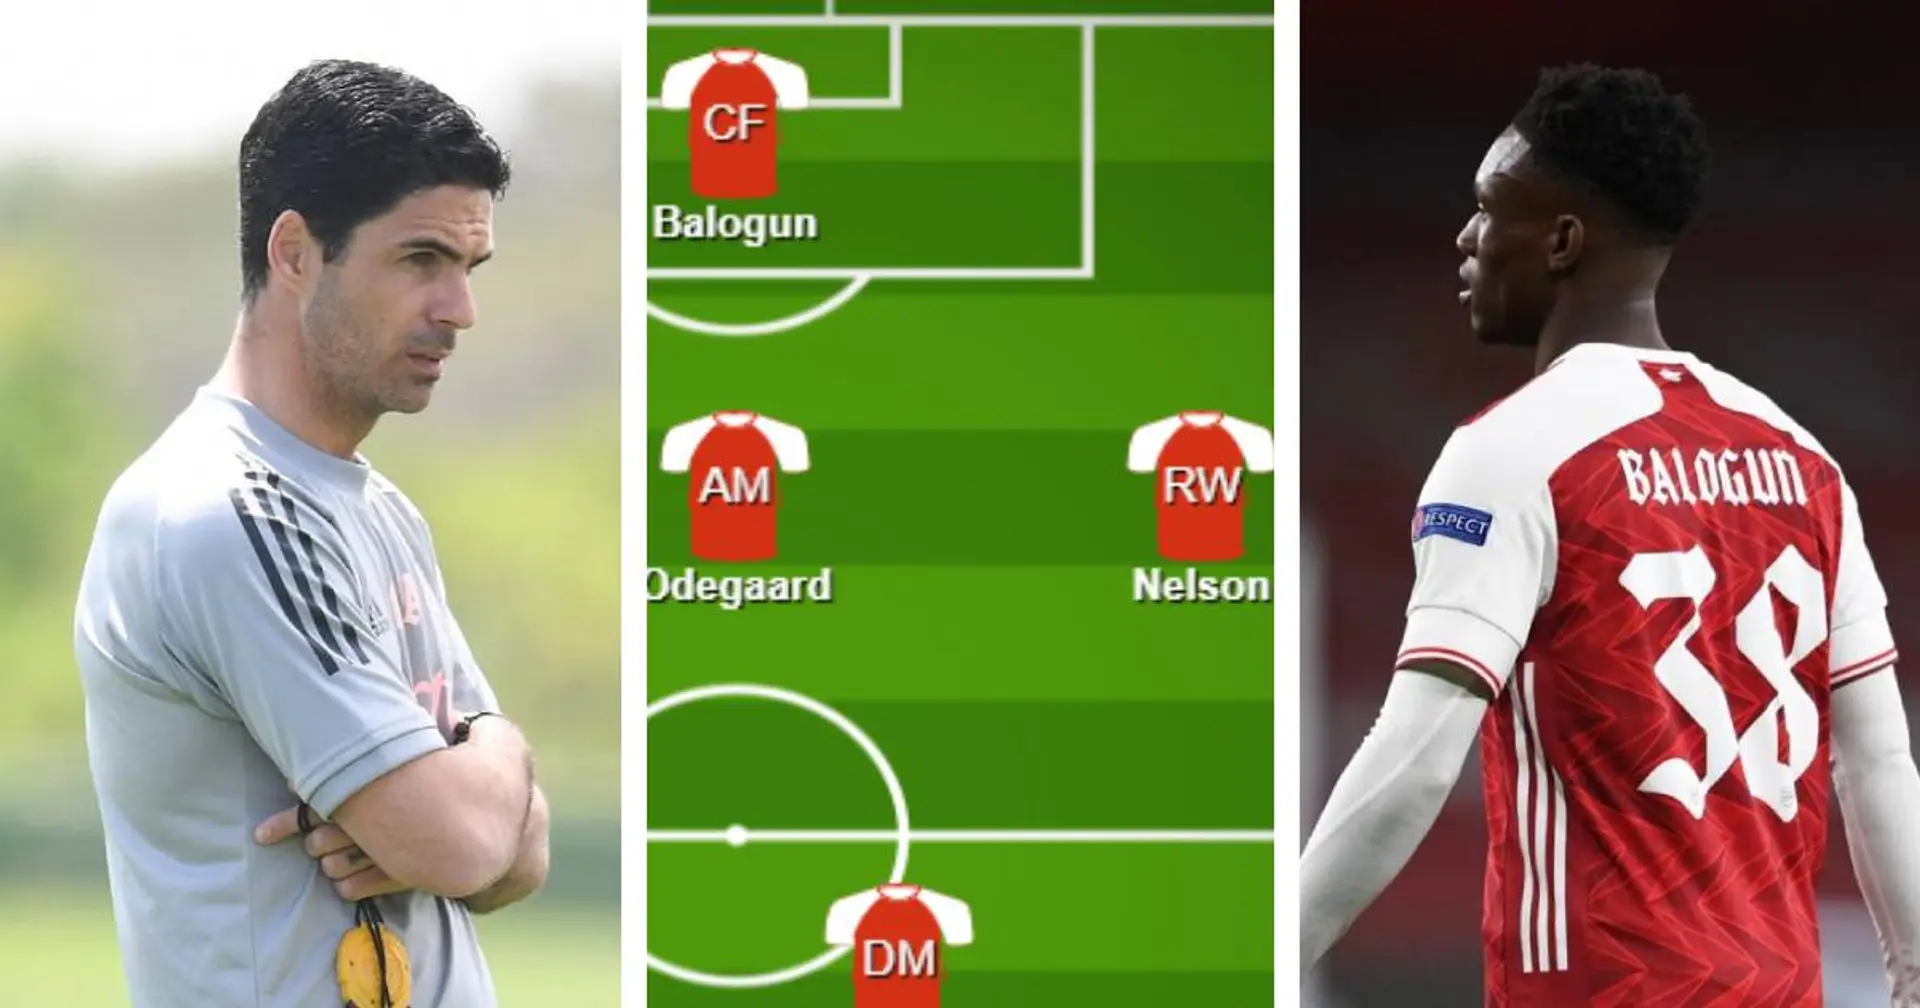 Midfield reshuffle? Balogun up front? Choose your XI to face Chelsea from 2 options!